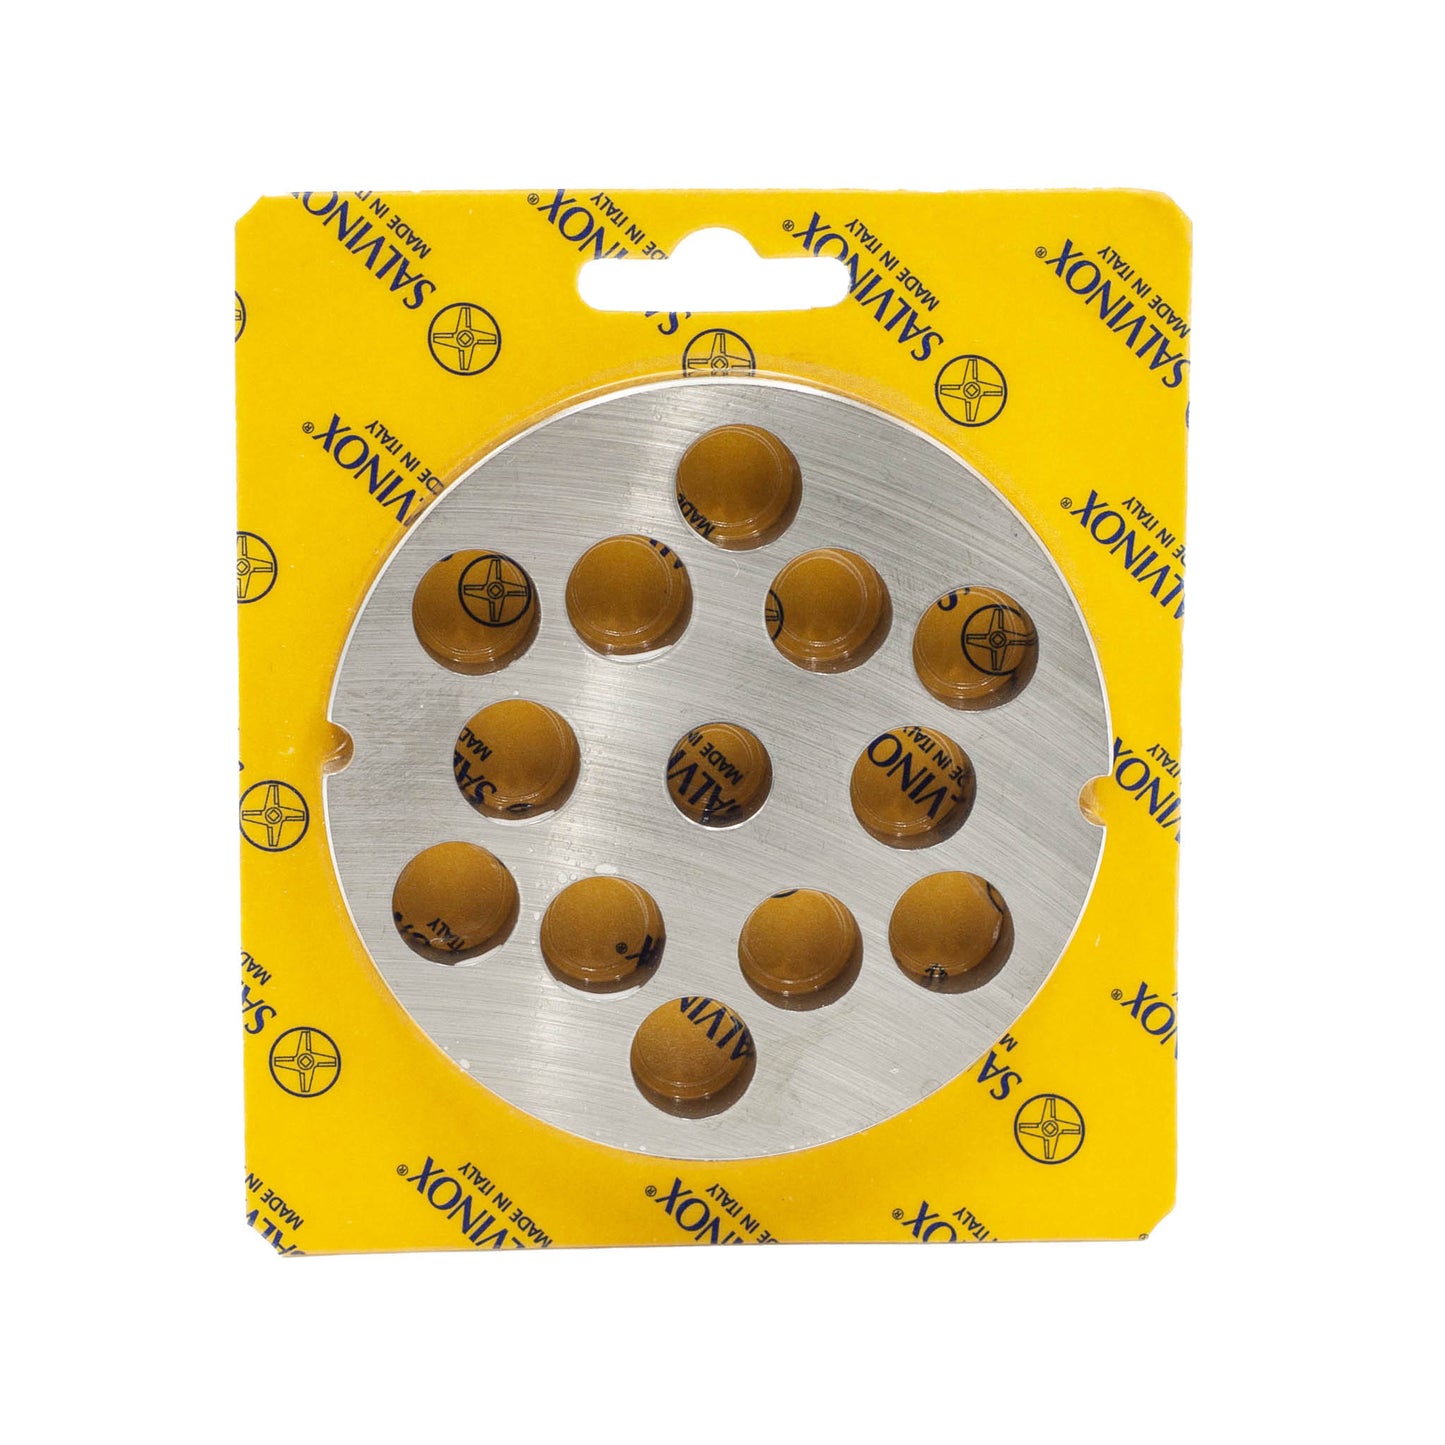 Size 32 with 16mm holes stainless steel replacement mincer plate for salami and sausage mincing machines. 